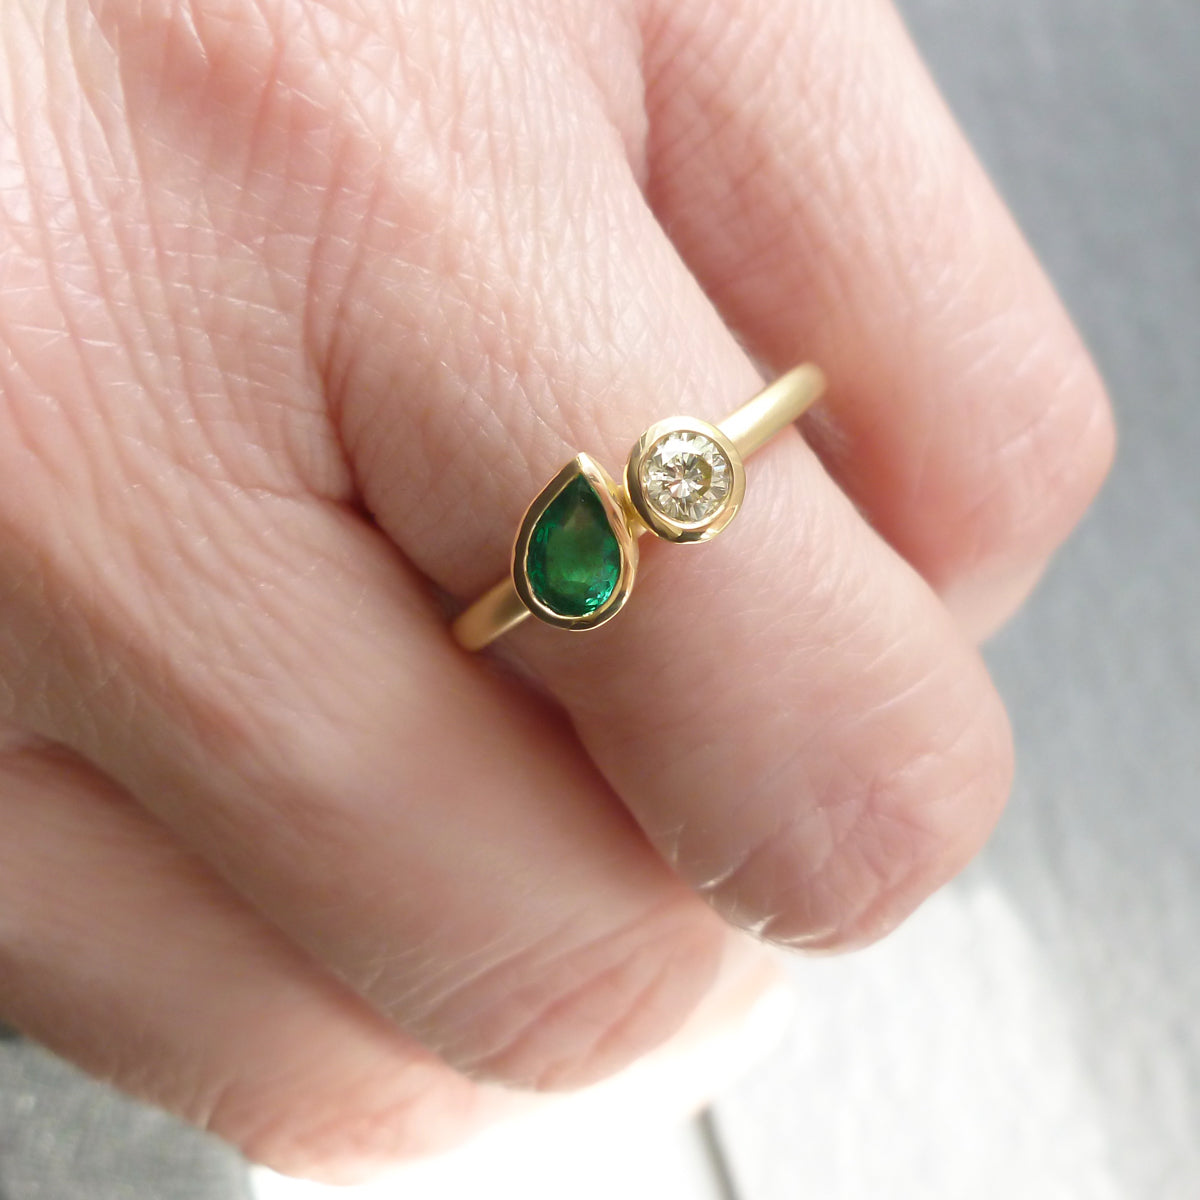 Pear shape emerald and diamond ring contemporary unique and modern.